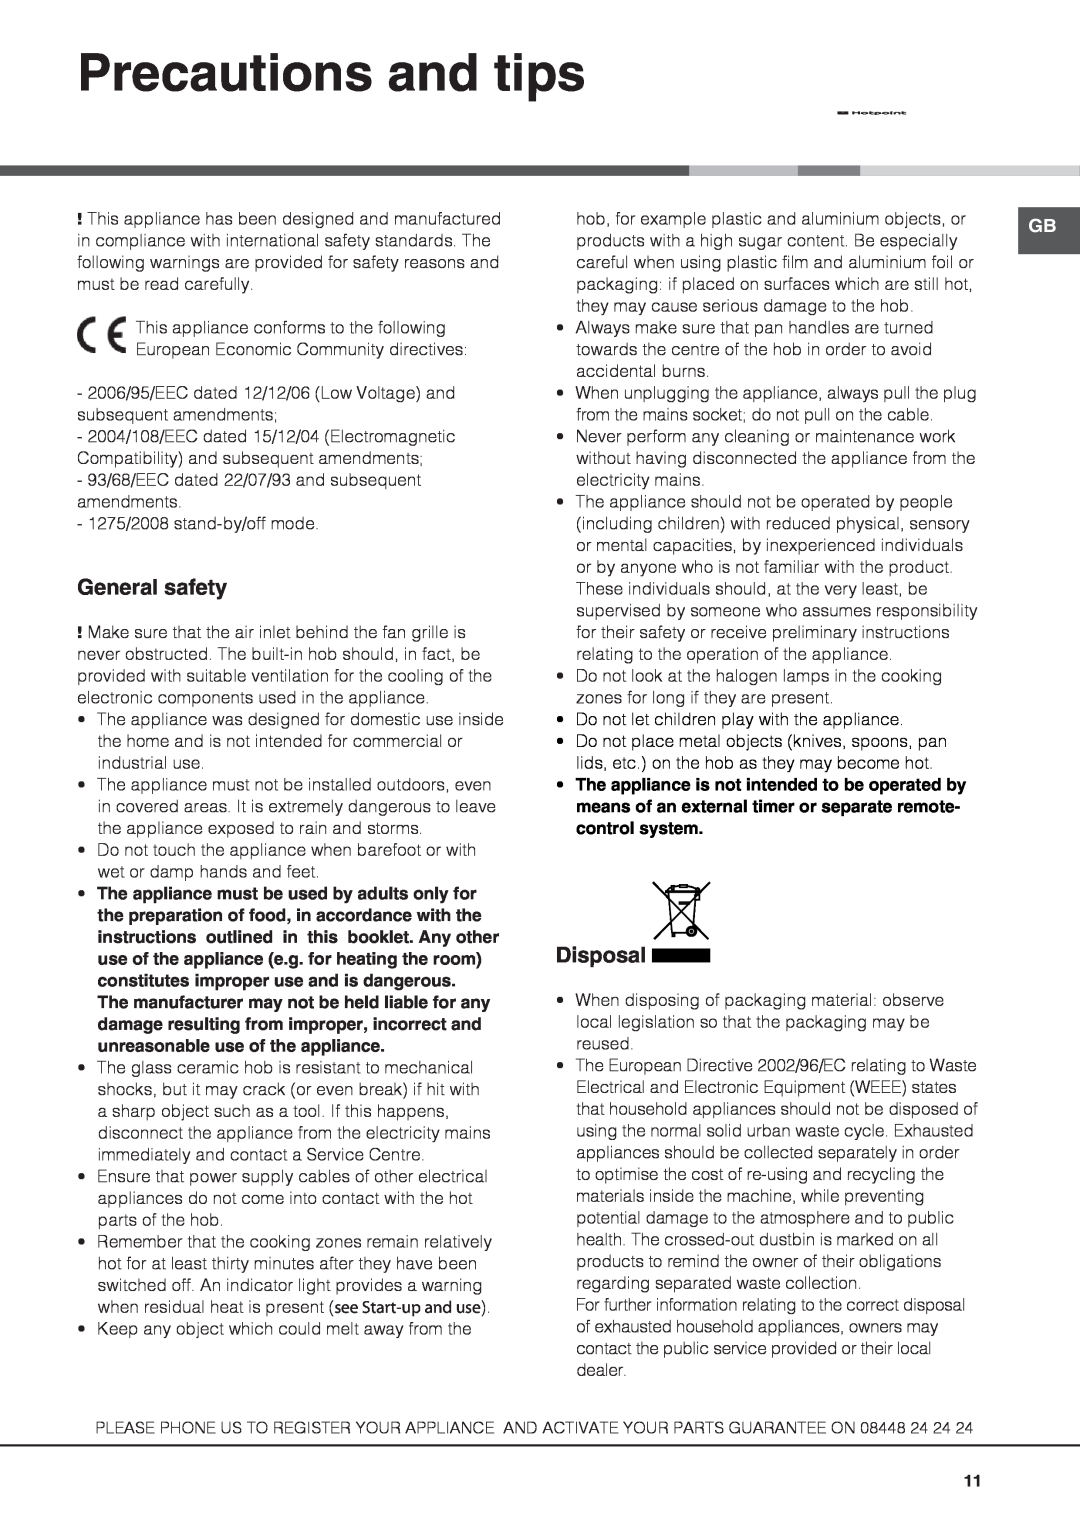 Hotpoint CRA 641 D C, CBRA 640 X S, KSC 640 X S manual Precautions and tips, General safety, Disposal 